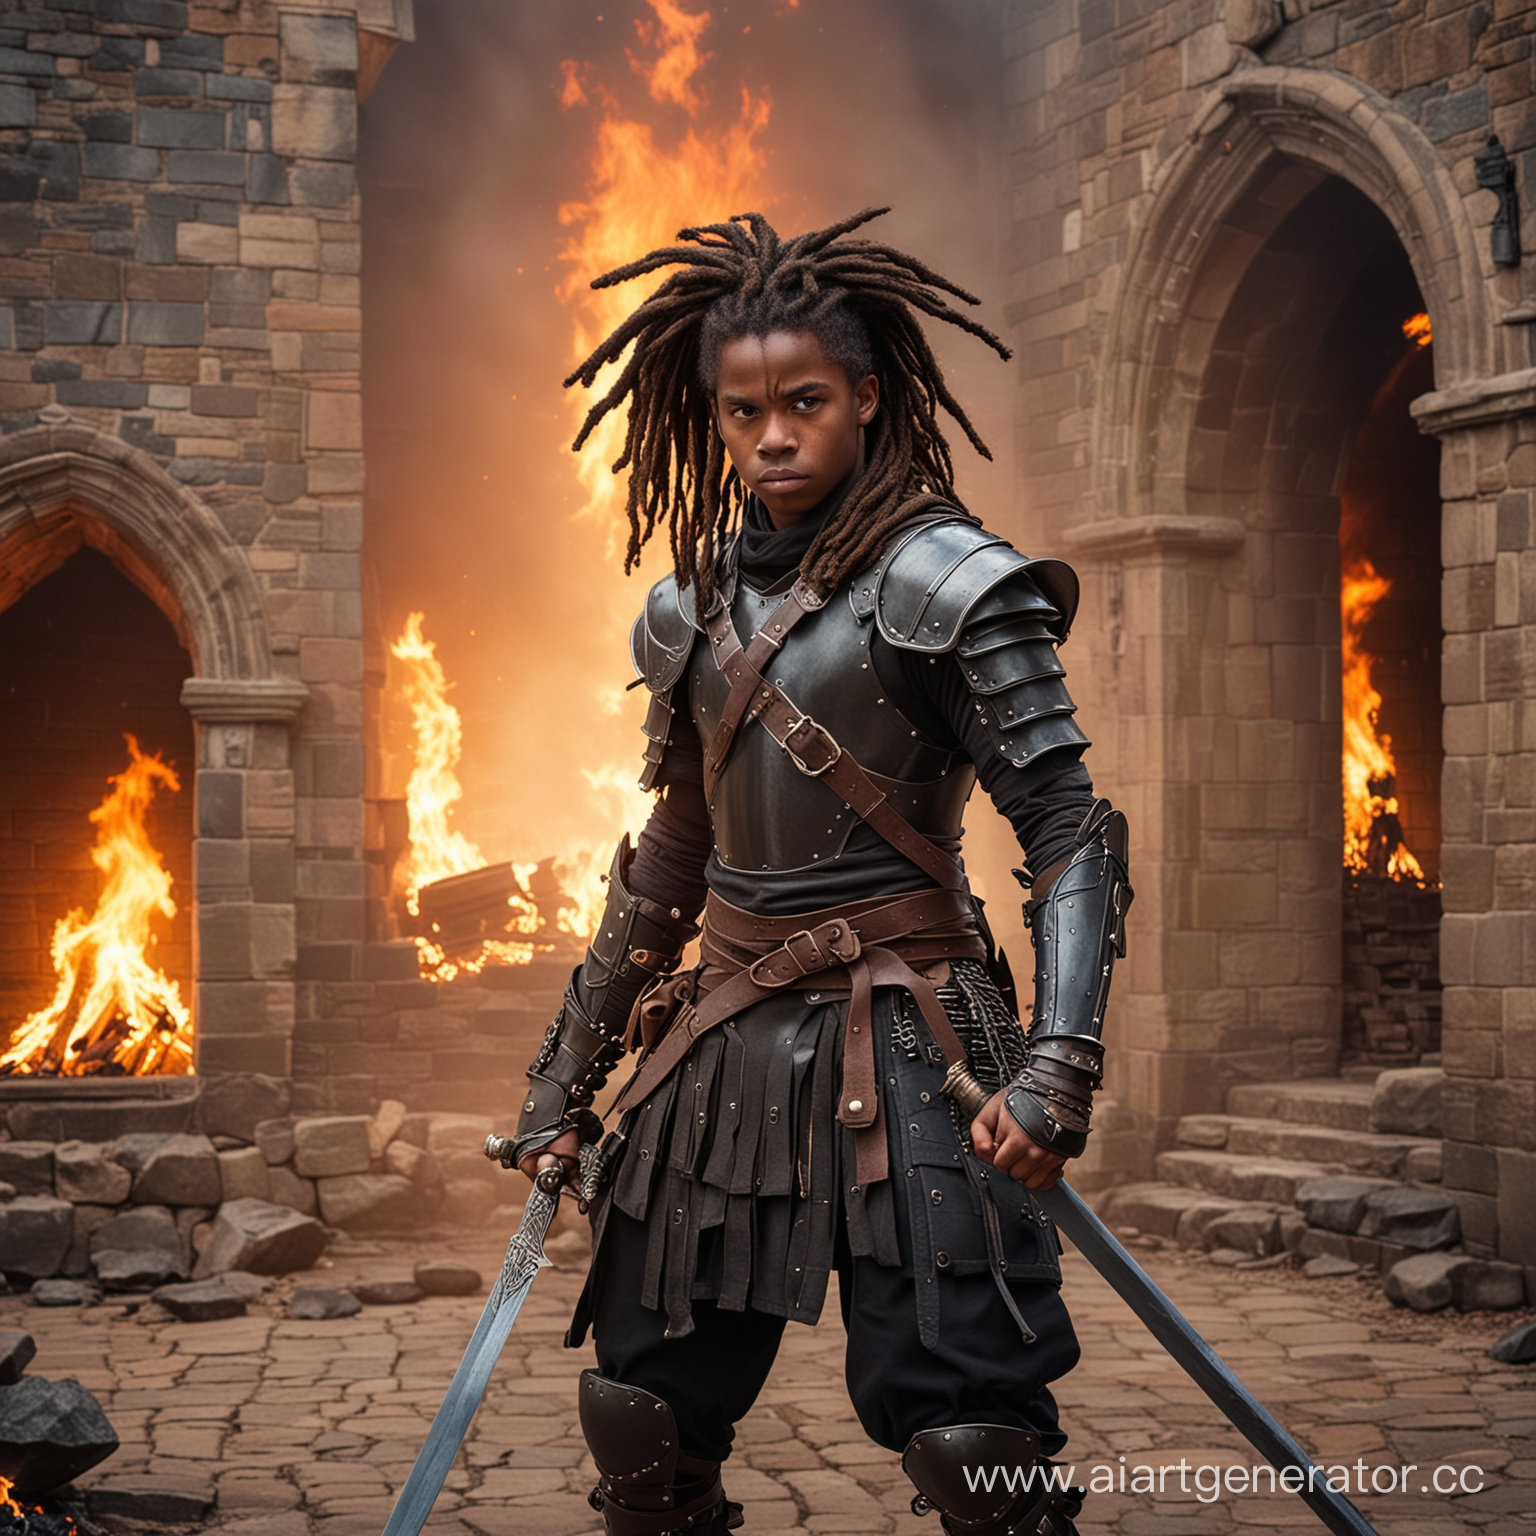 A young black teenage boy warrior in armor, with dreadlocks, carrying a sword and fighting in a castle, fire background.